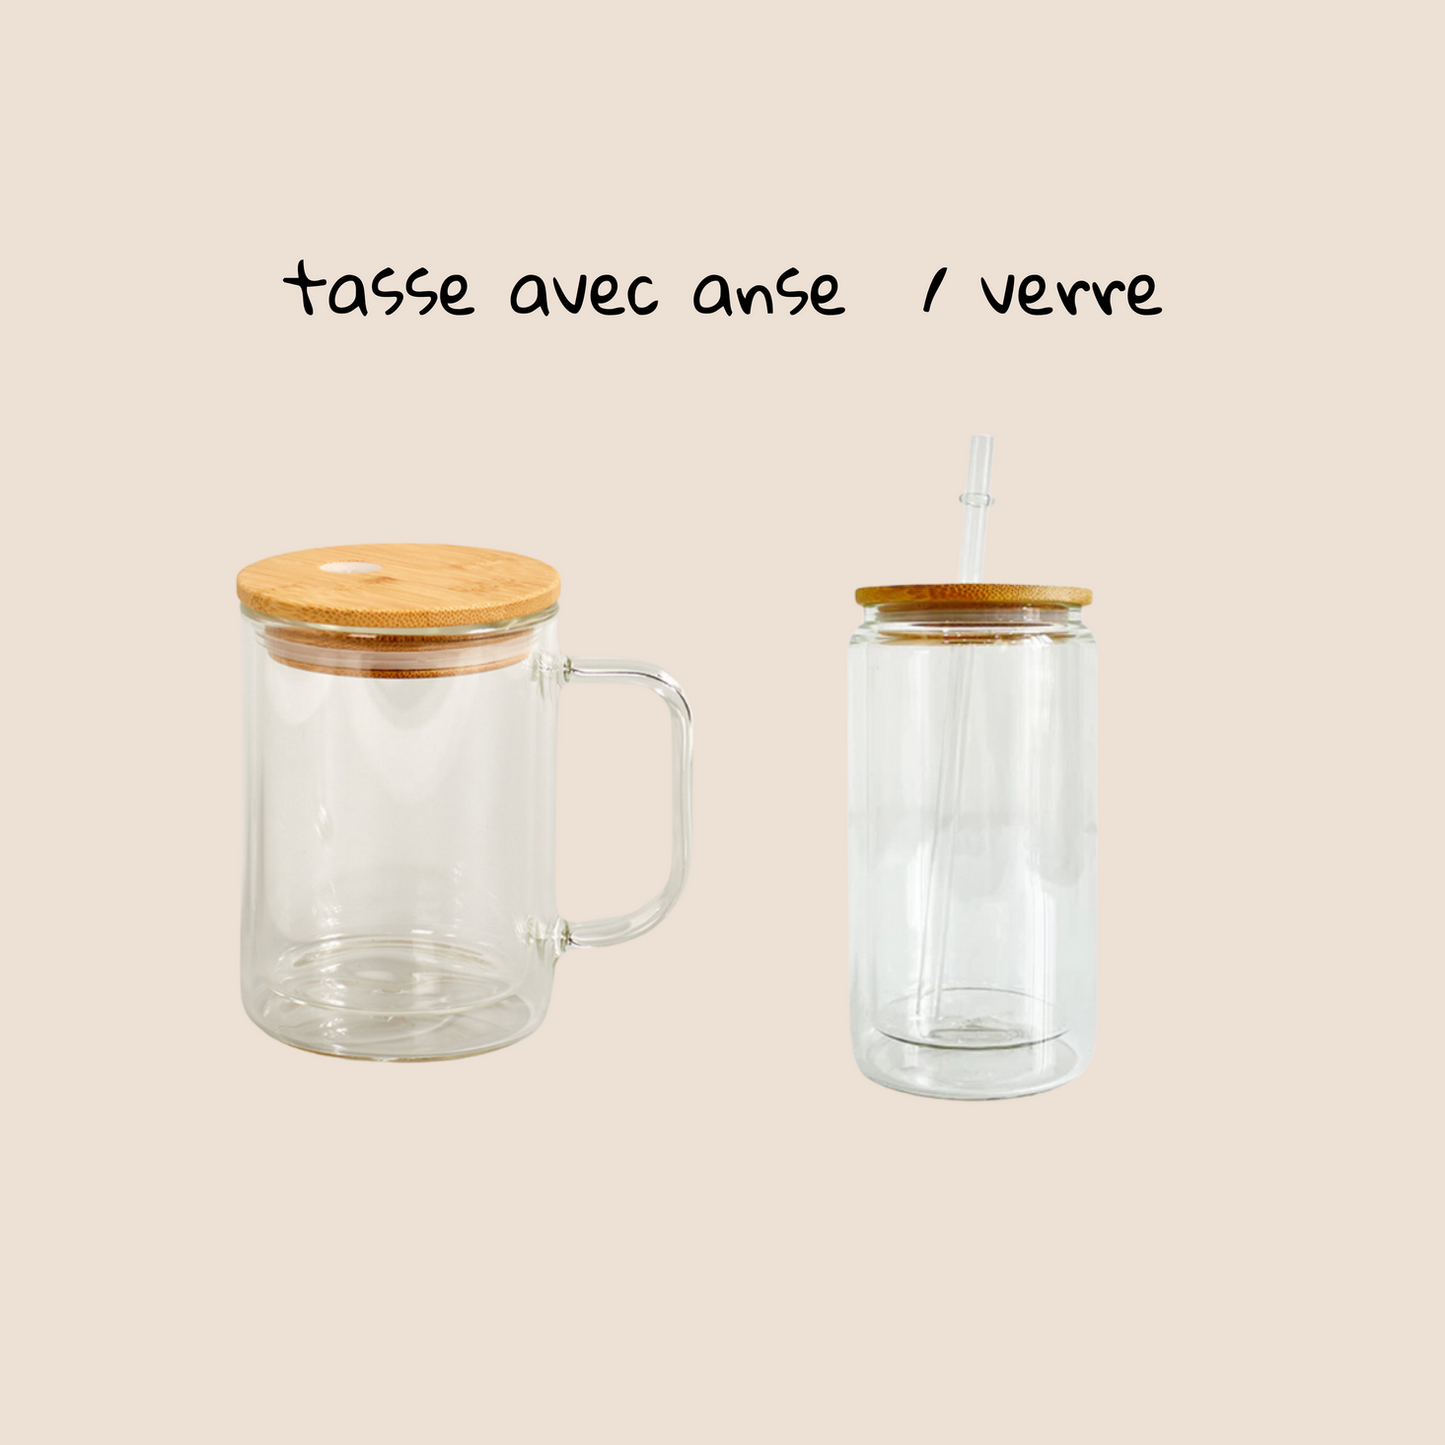 Verre - All emotions